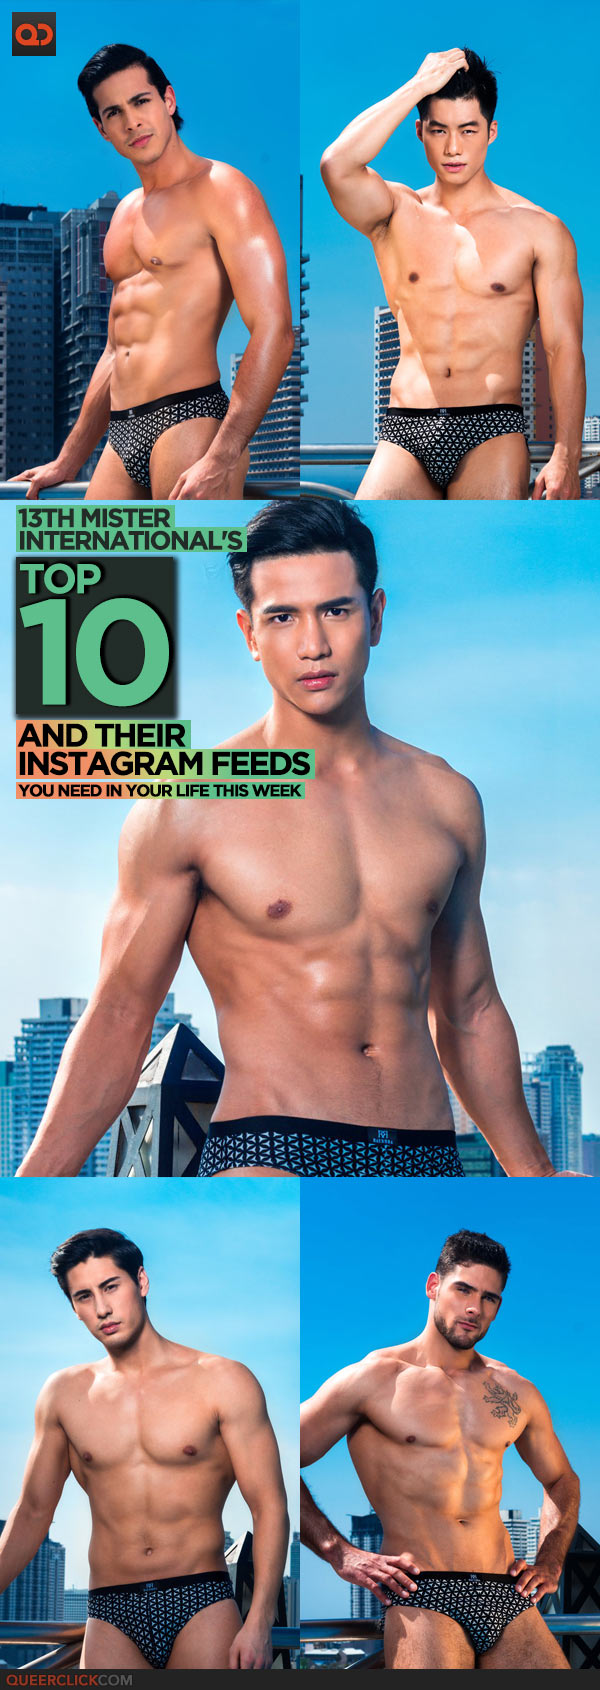 13th Mister International's Top 10 & Their Instagram Feeds You Need In Your Life This Week!